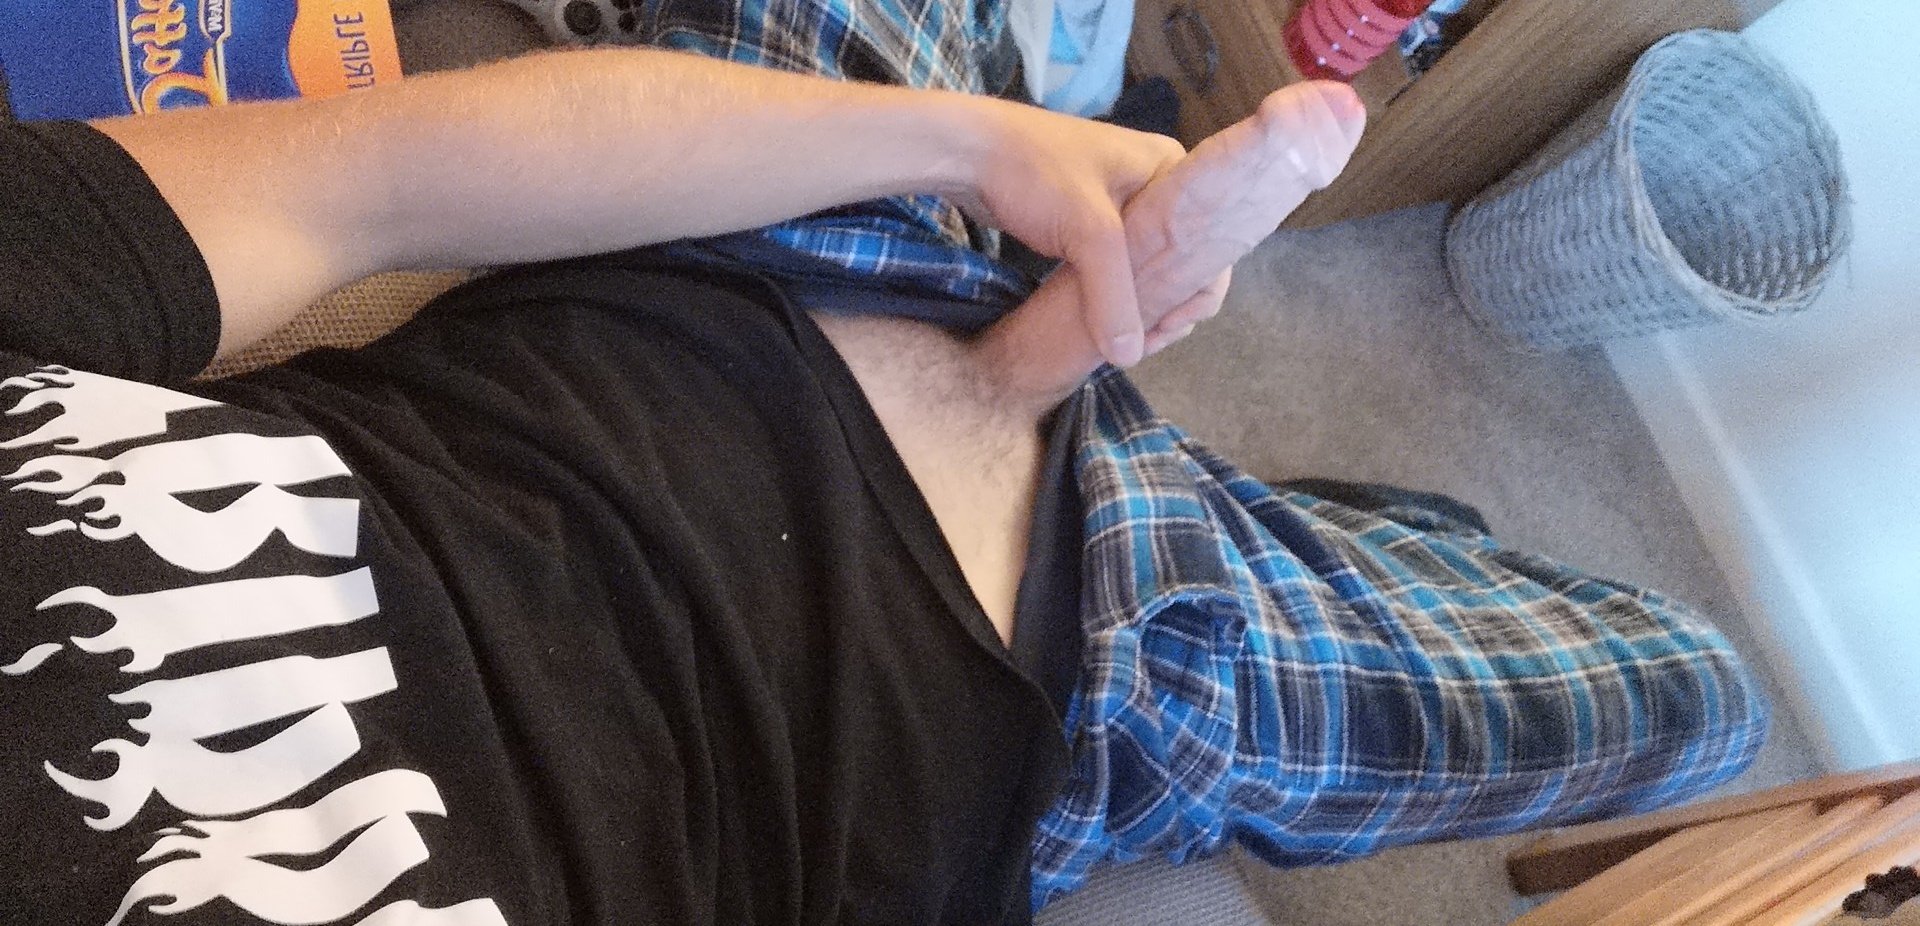 21 M4F England, We're watching Netflix, you look down and see this...